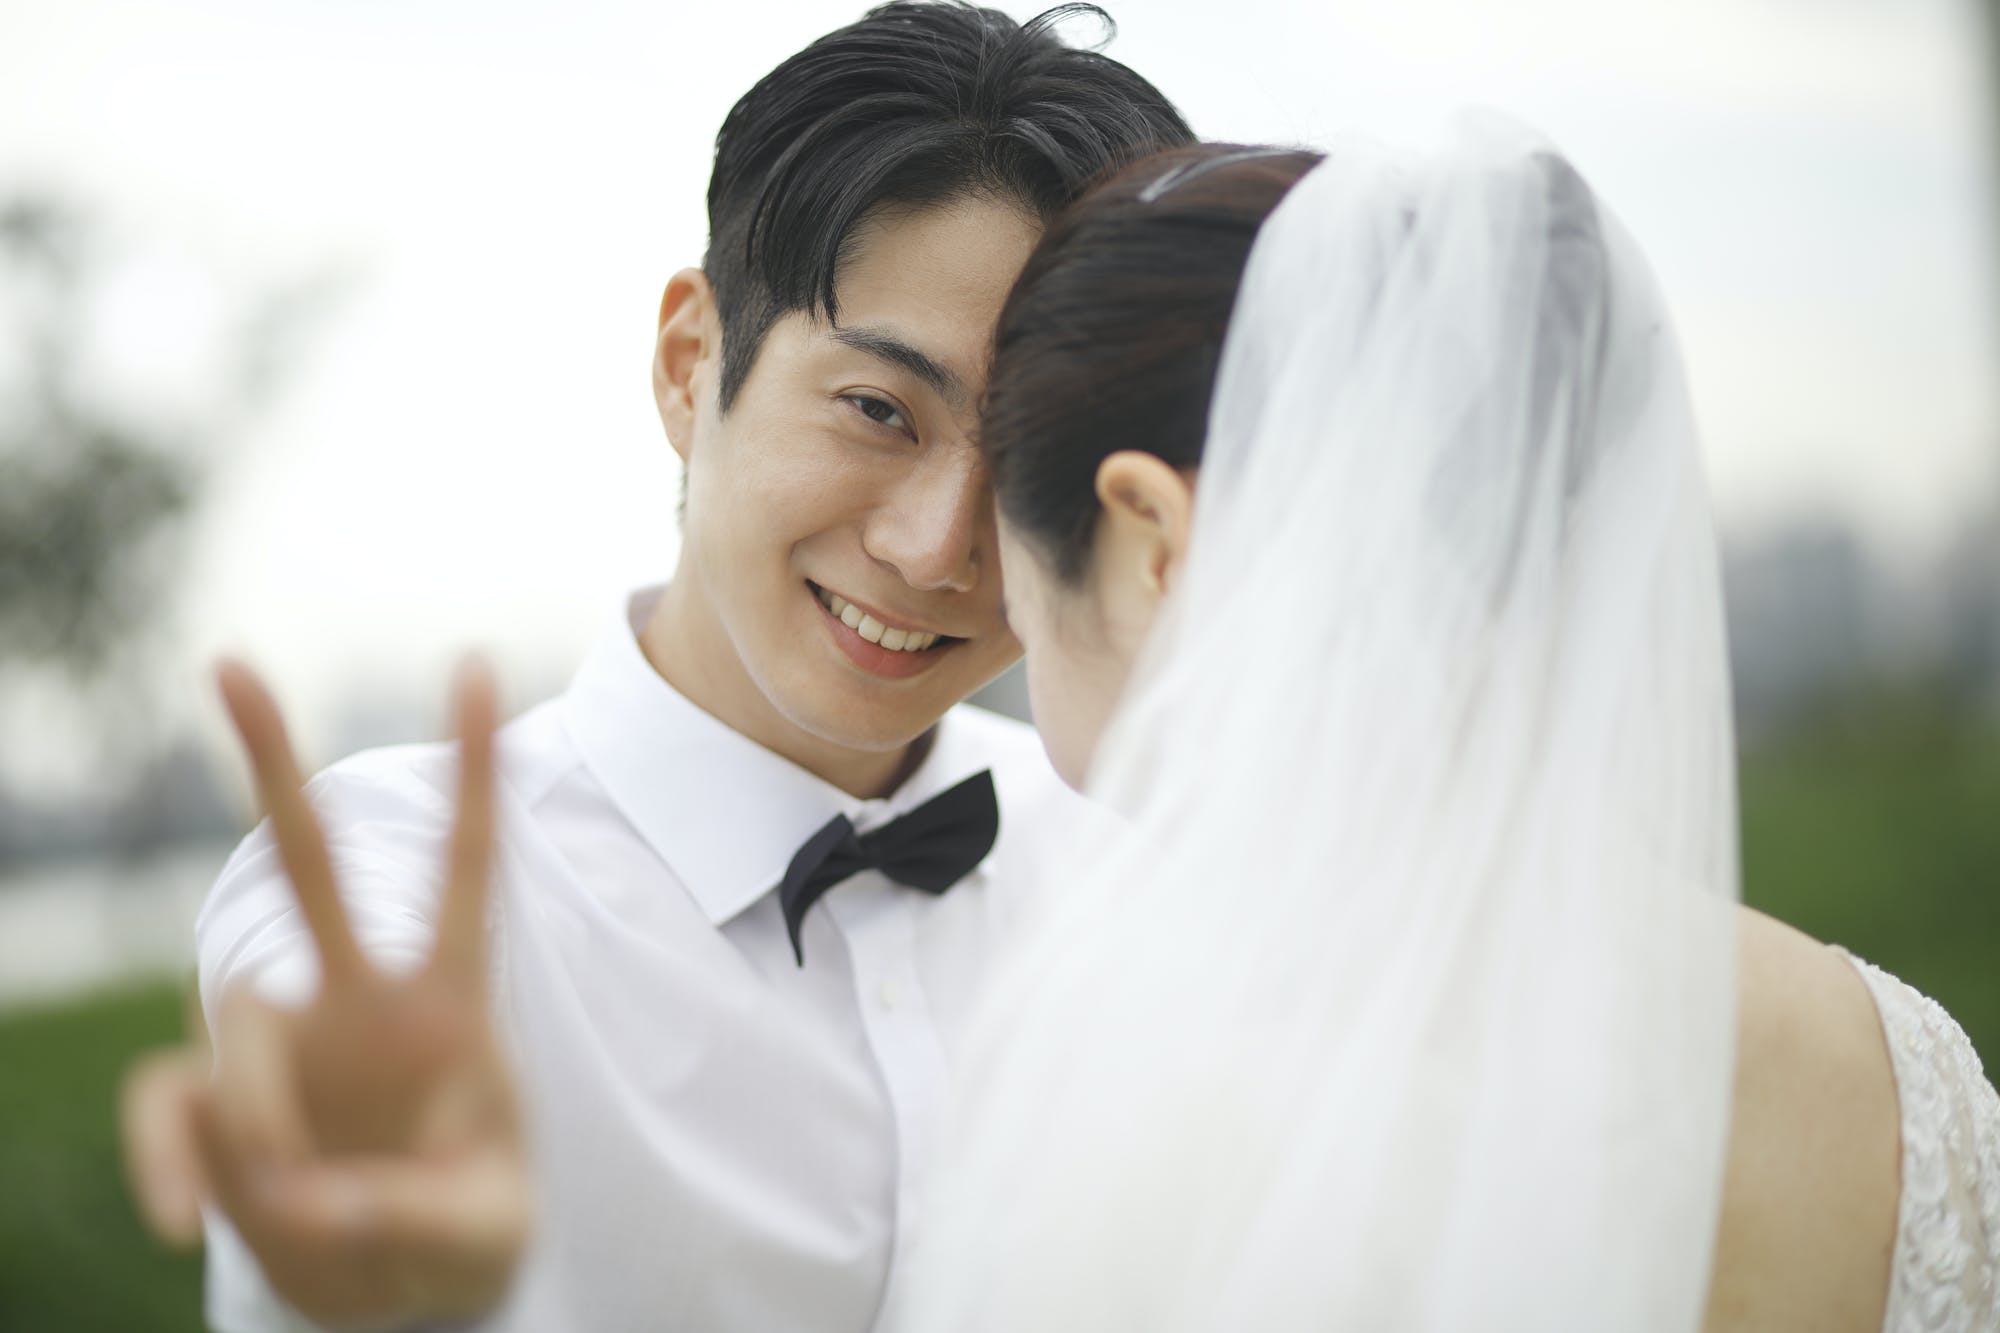 south korea's gender imbalance is bad news for men − outnumbering women, many face bleak marriage prospects